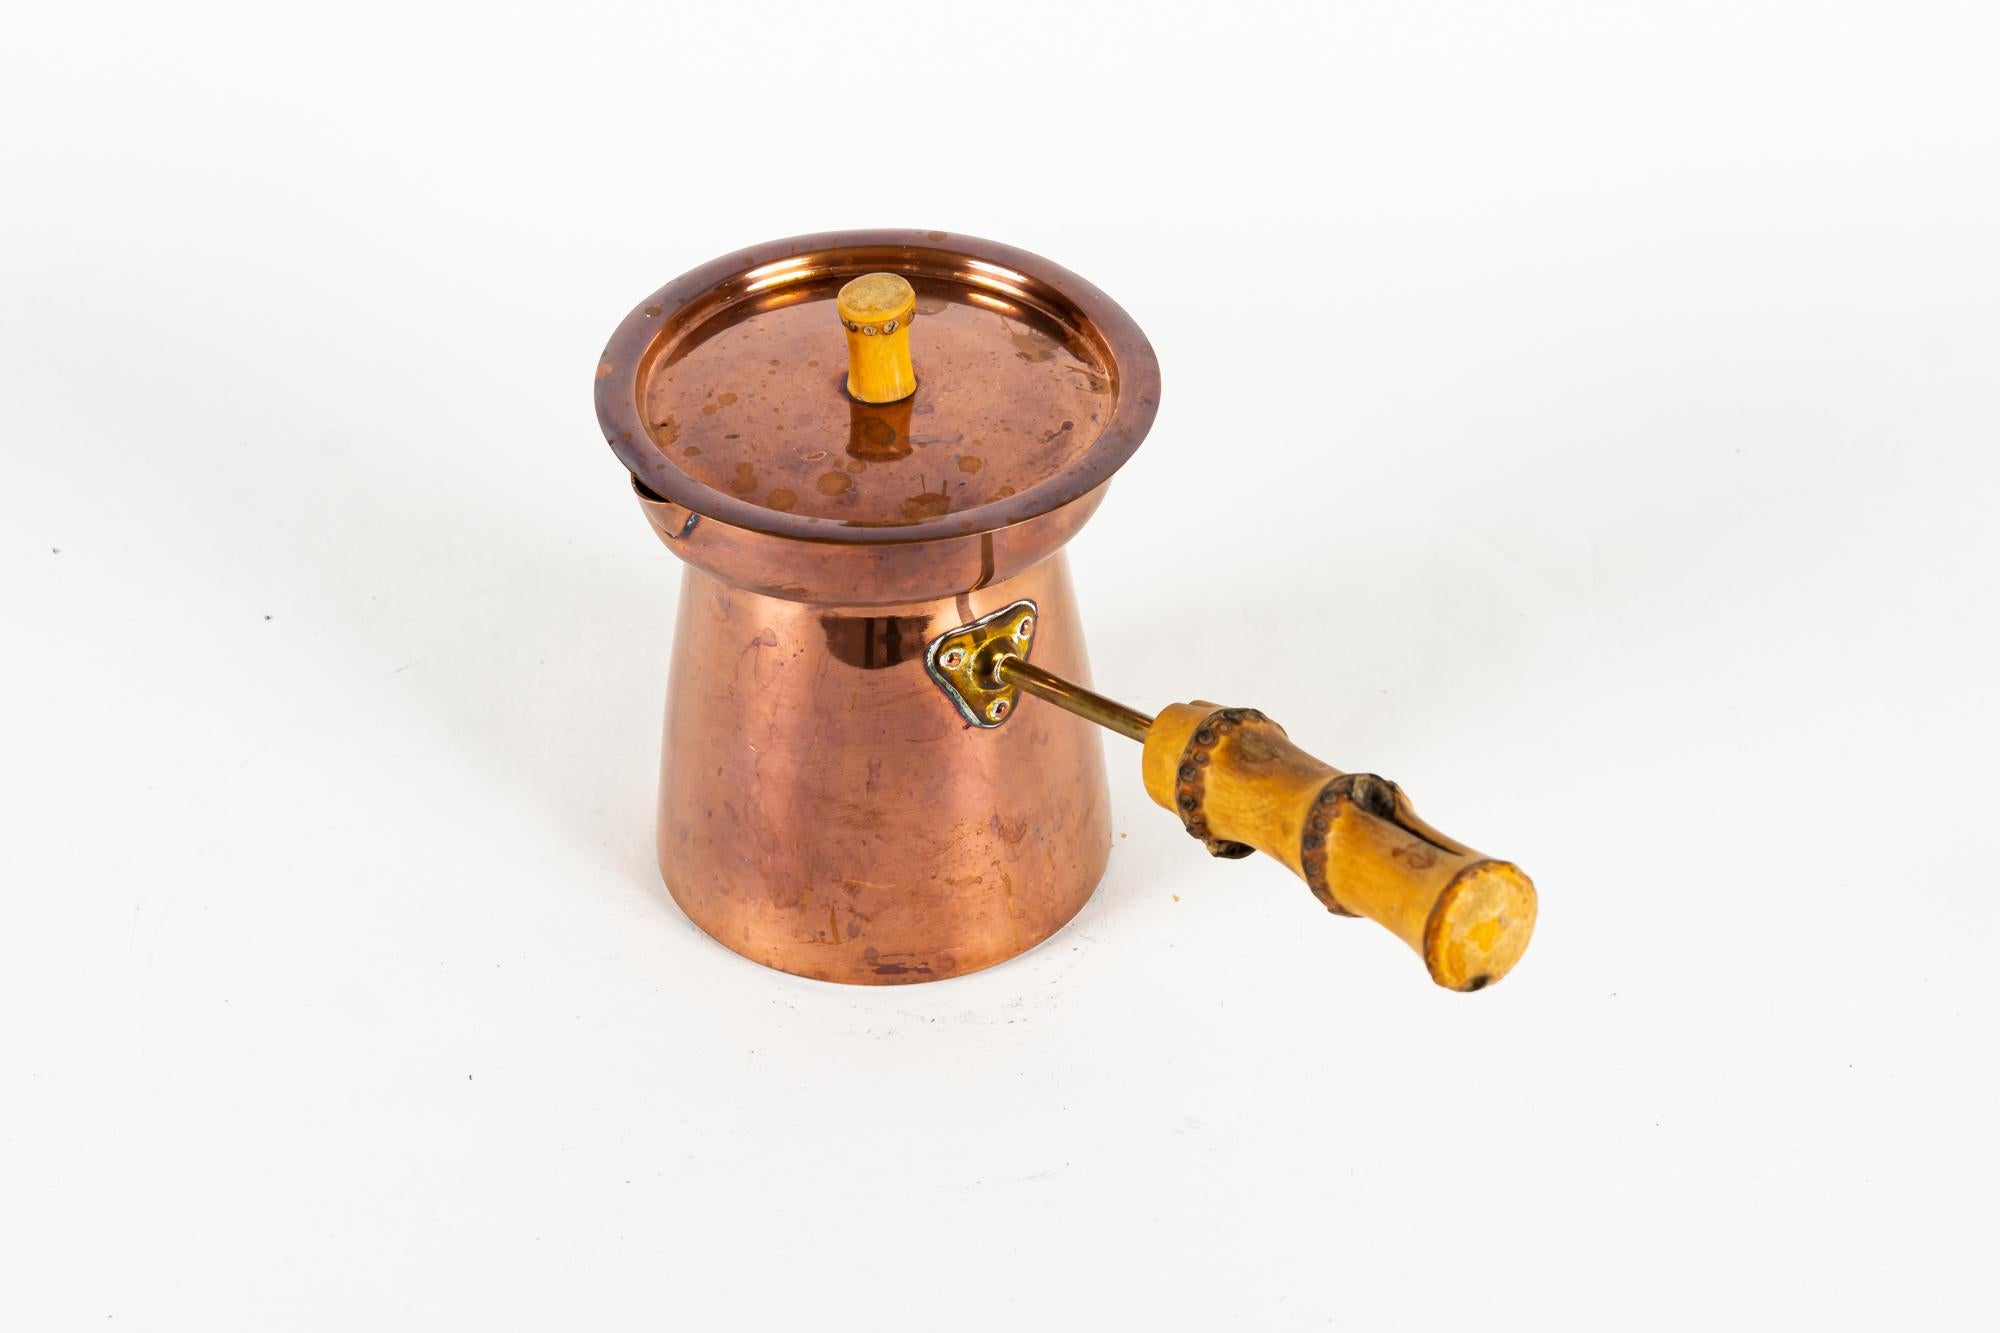 Copper coffee pot with bamboo handle around 1950s
Original condition.